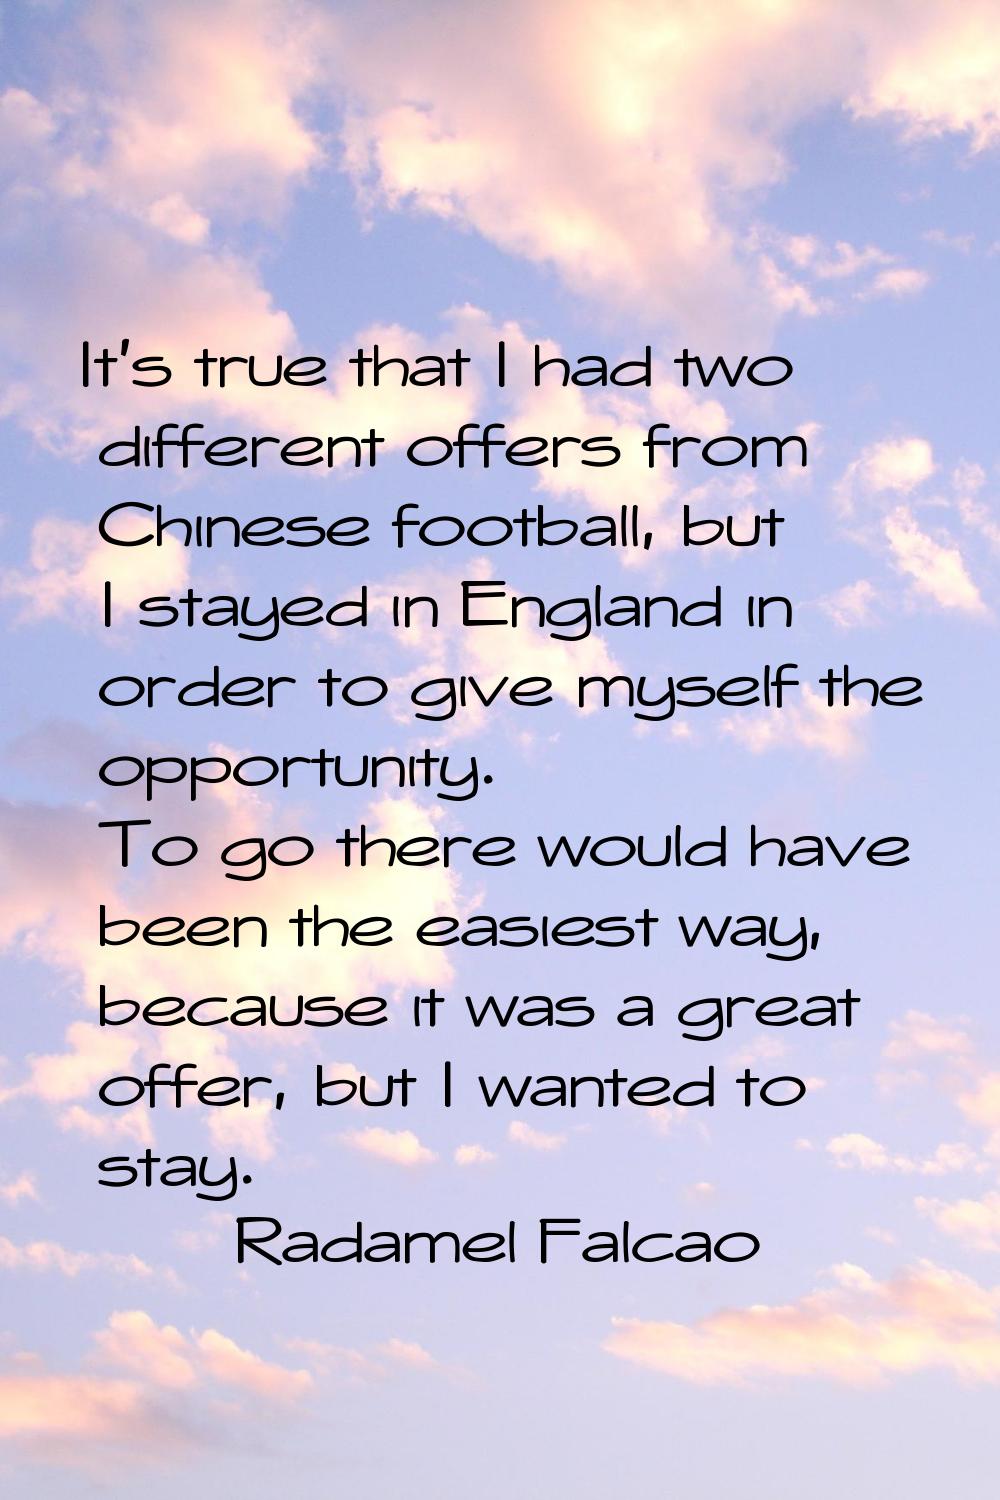 It's true that I had two different offers from Chinese football, but I stayed in England in order t